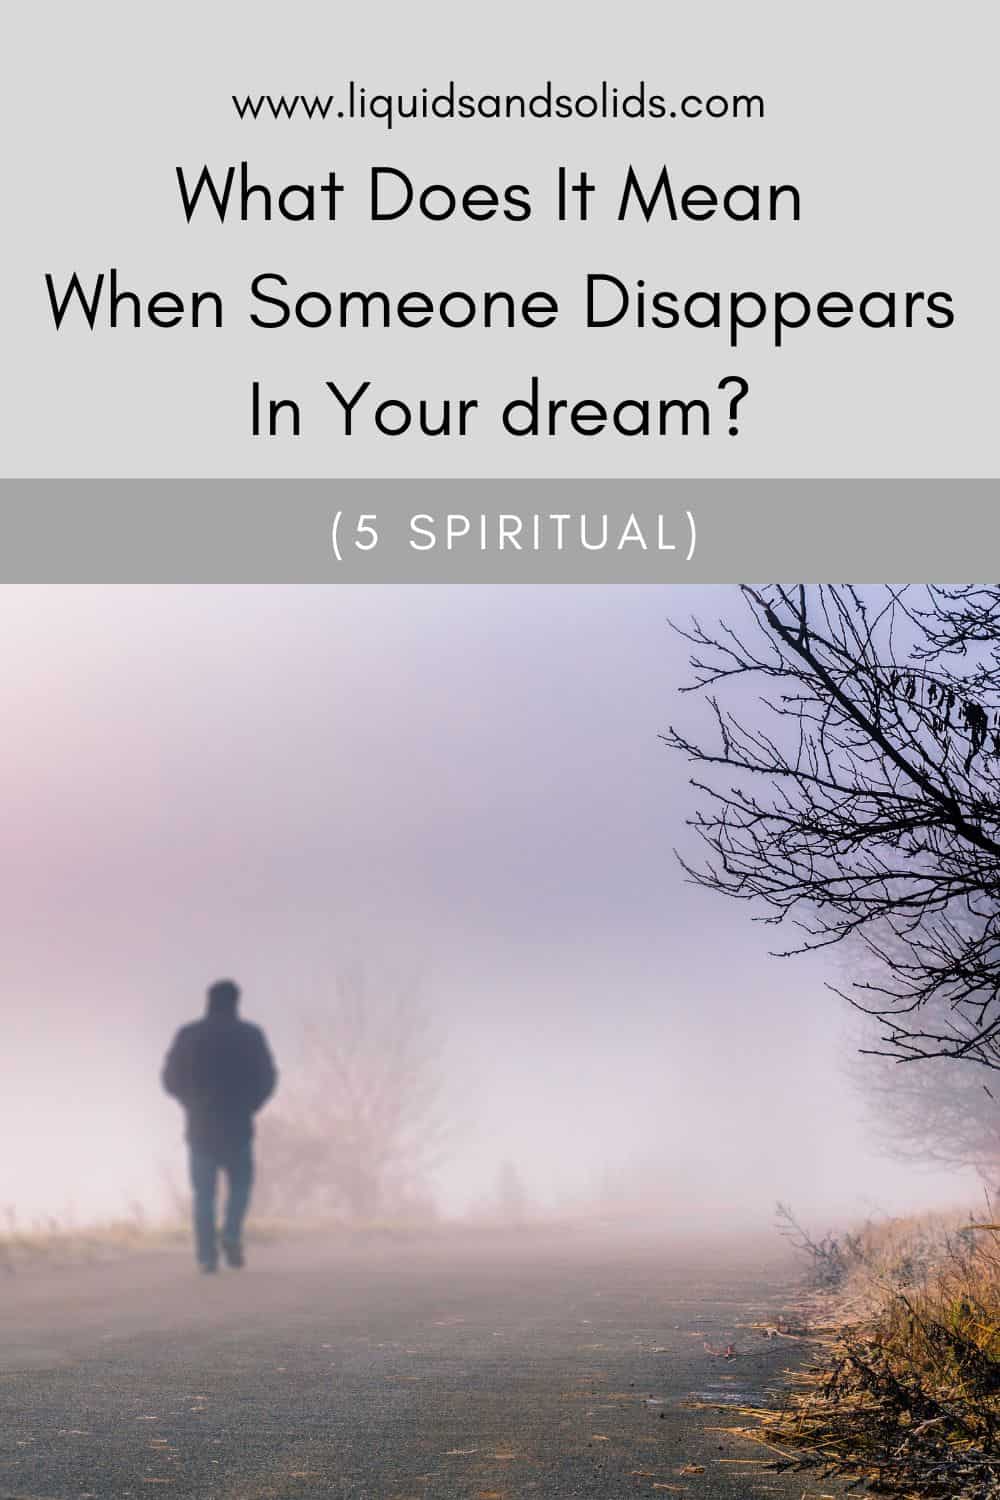 What Does It Mean When Someone Disappears In Your dream? (5 Spiritual)